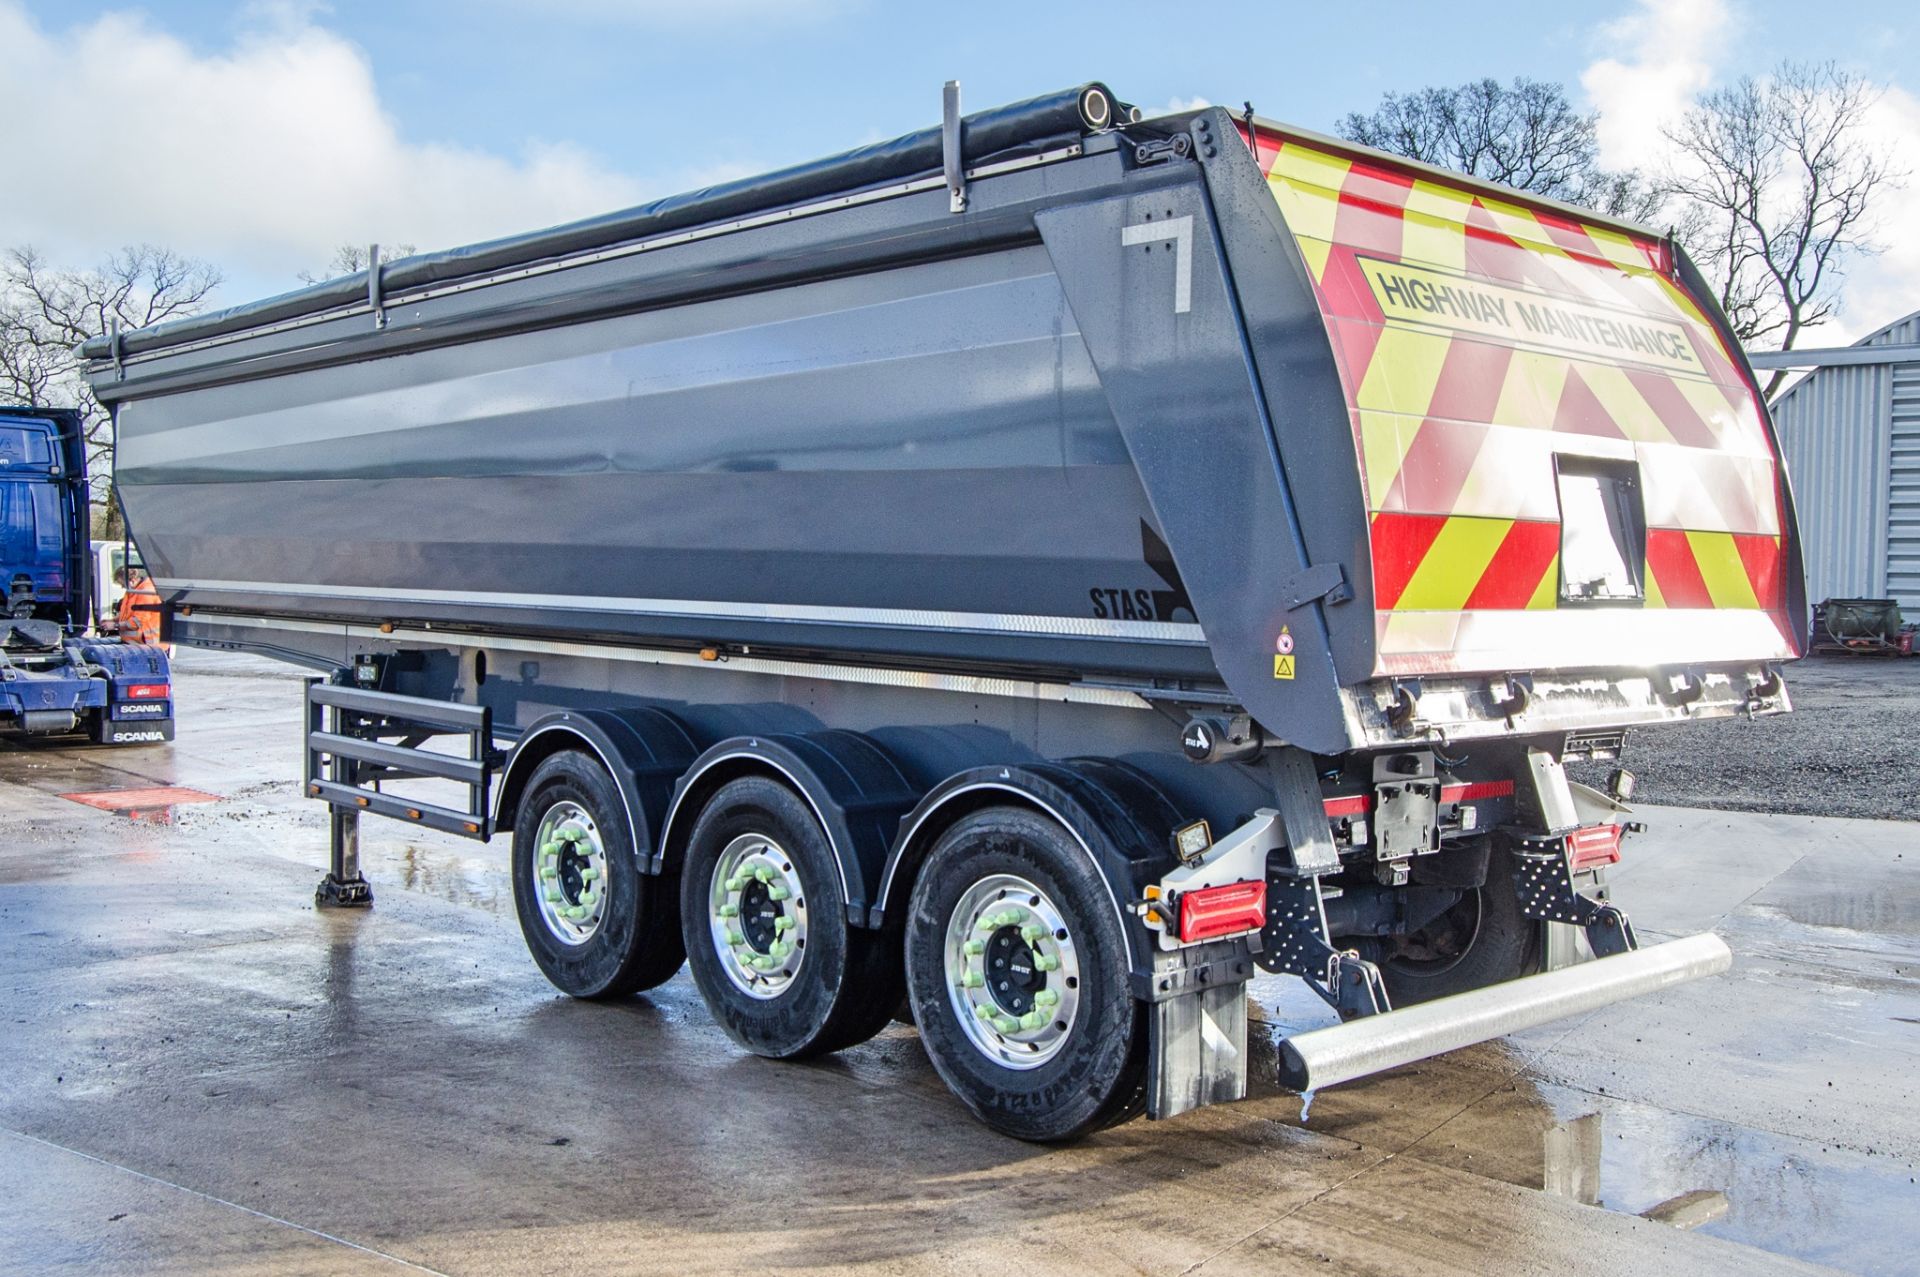 Stas 10.5 metre tri-axle aggregate tipping trailer Year: 2021 VIN: CXM0001552 Reg/Ident Mark: - Image 3 of 20